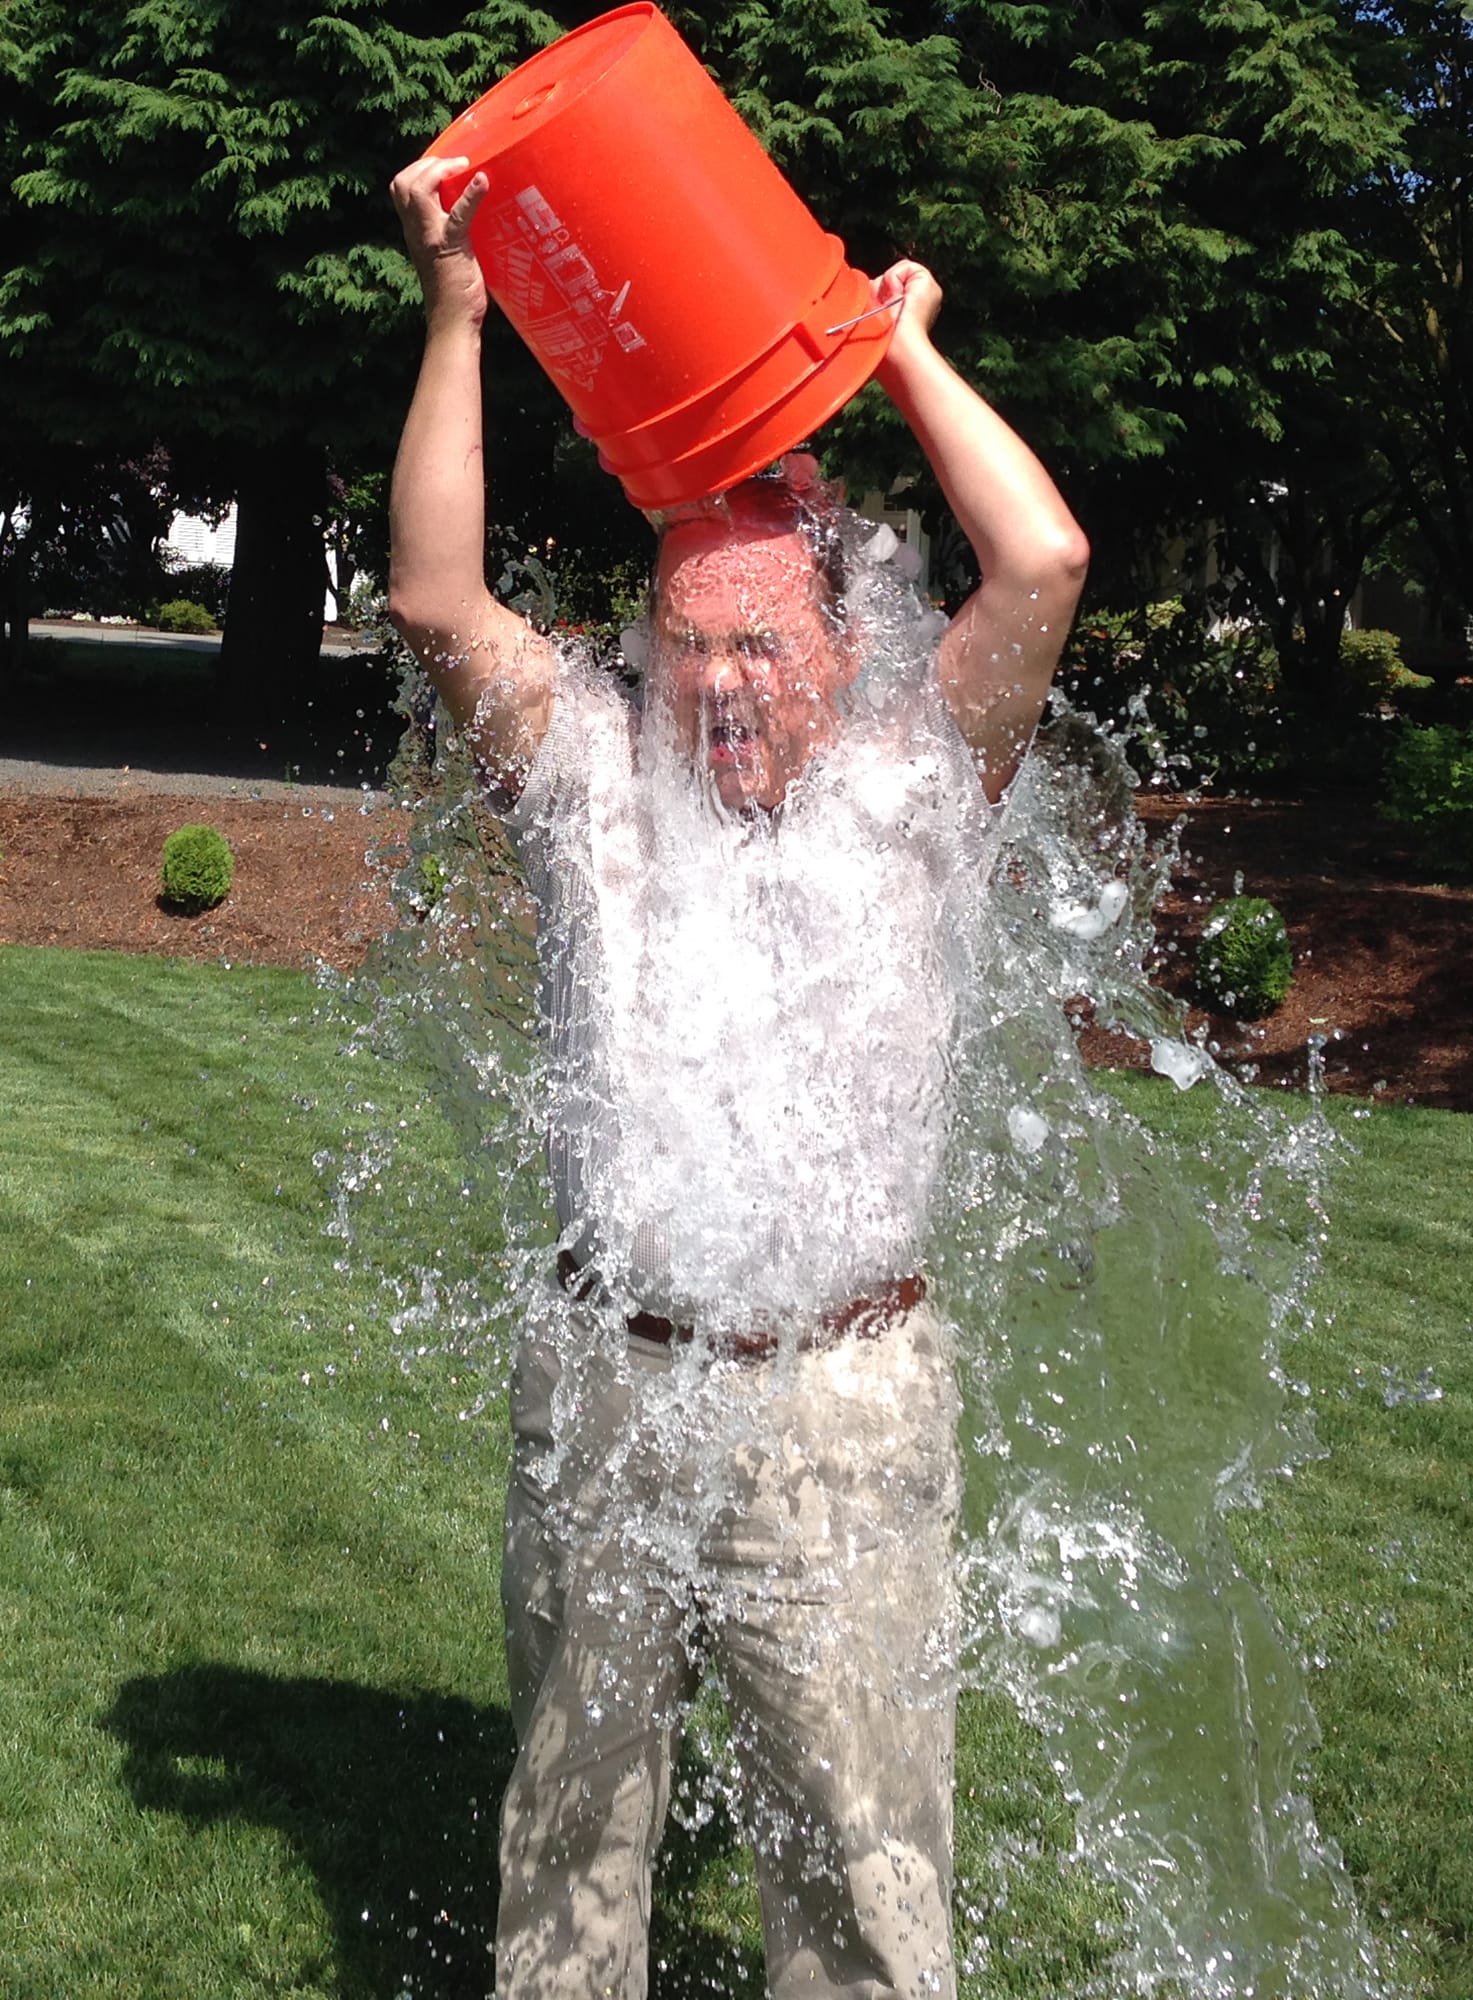 Clark County: Vancouver City Councilor Jack Burkman takes the ALS Association's Ice Bucket Challenge last month to support friend Mike Carnahan who was diagnosed with the disease 16 months ago.